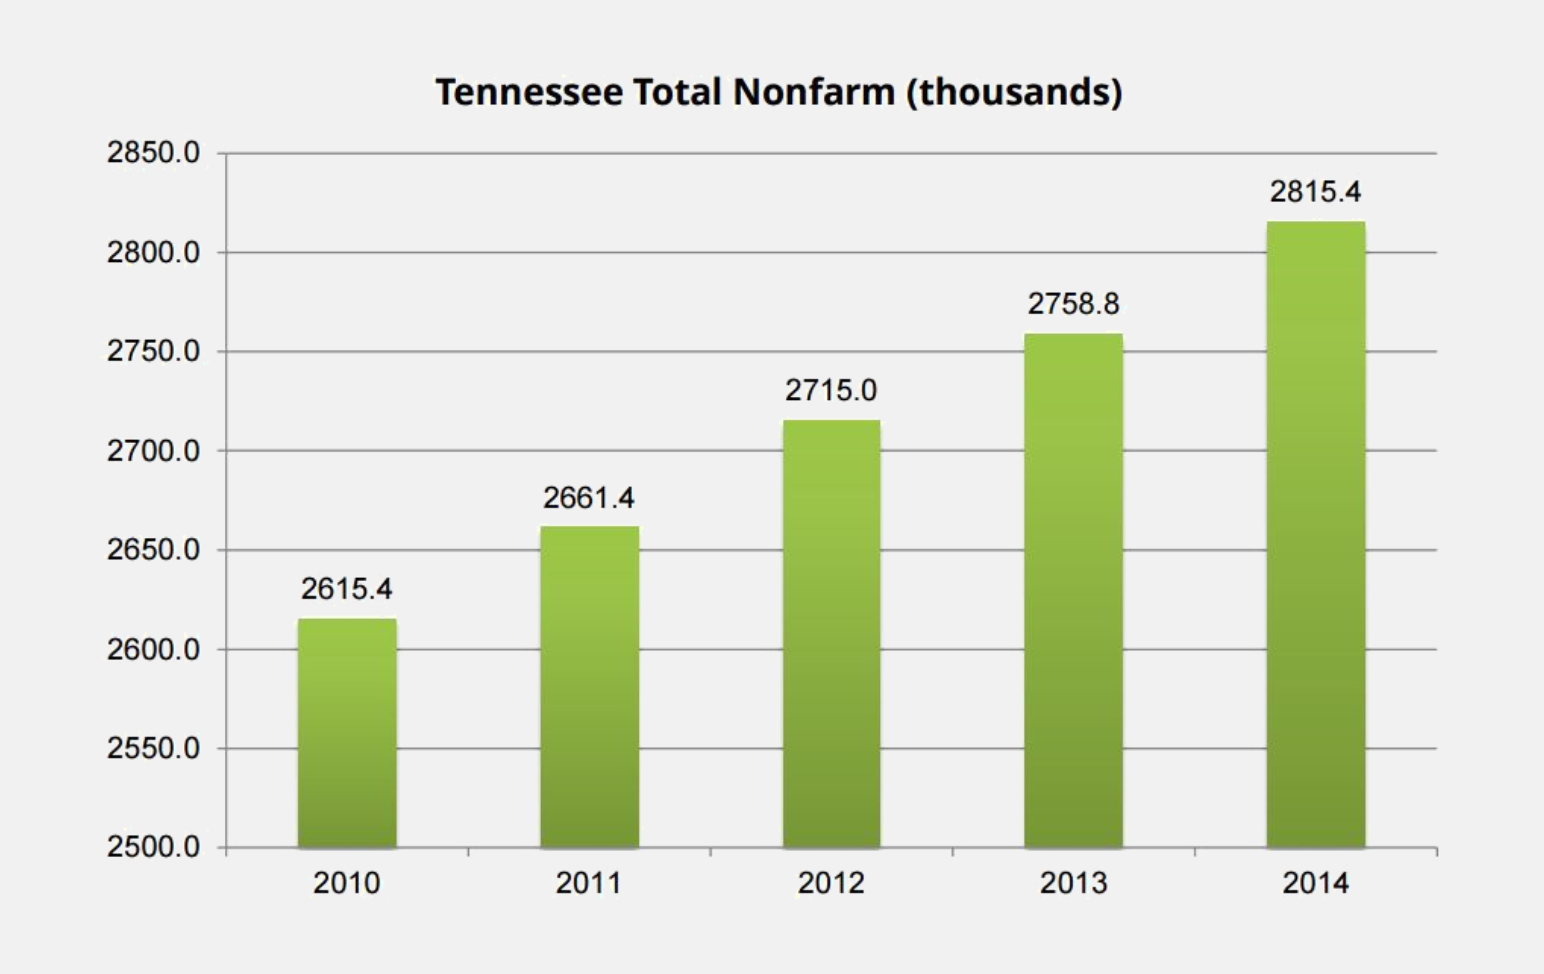 Bar chart of non-farm jobs in Tennessee over time